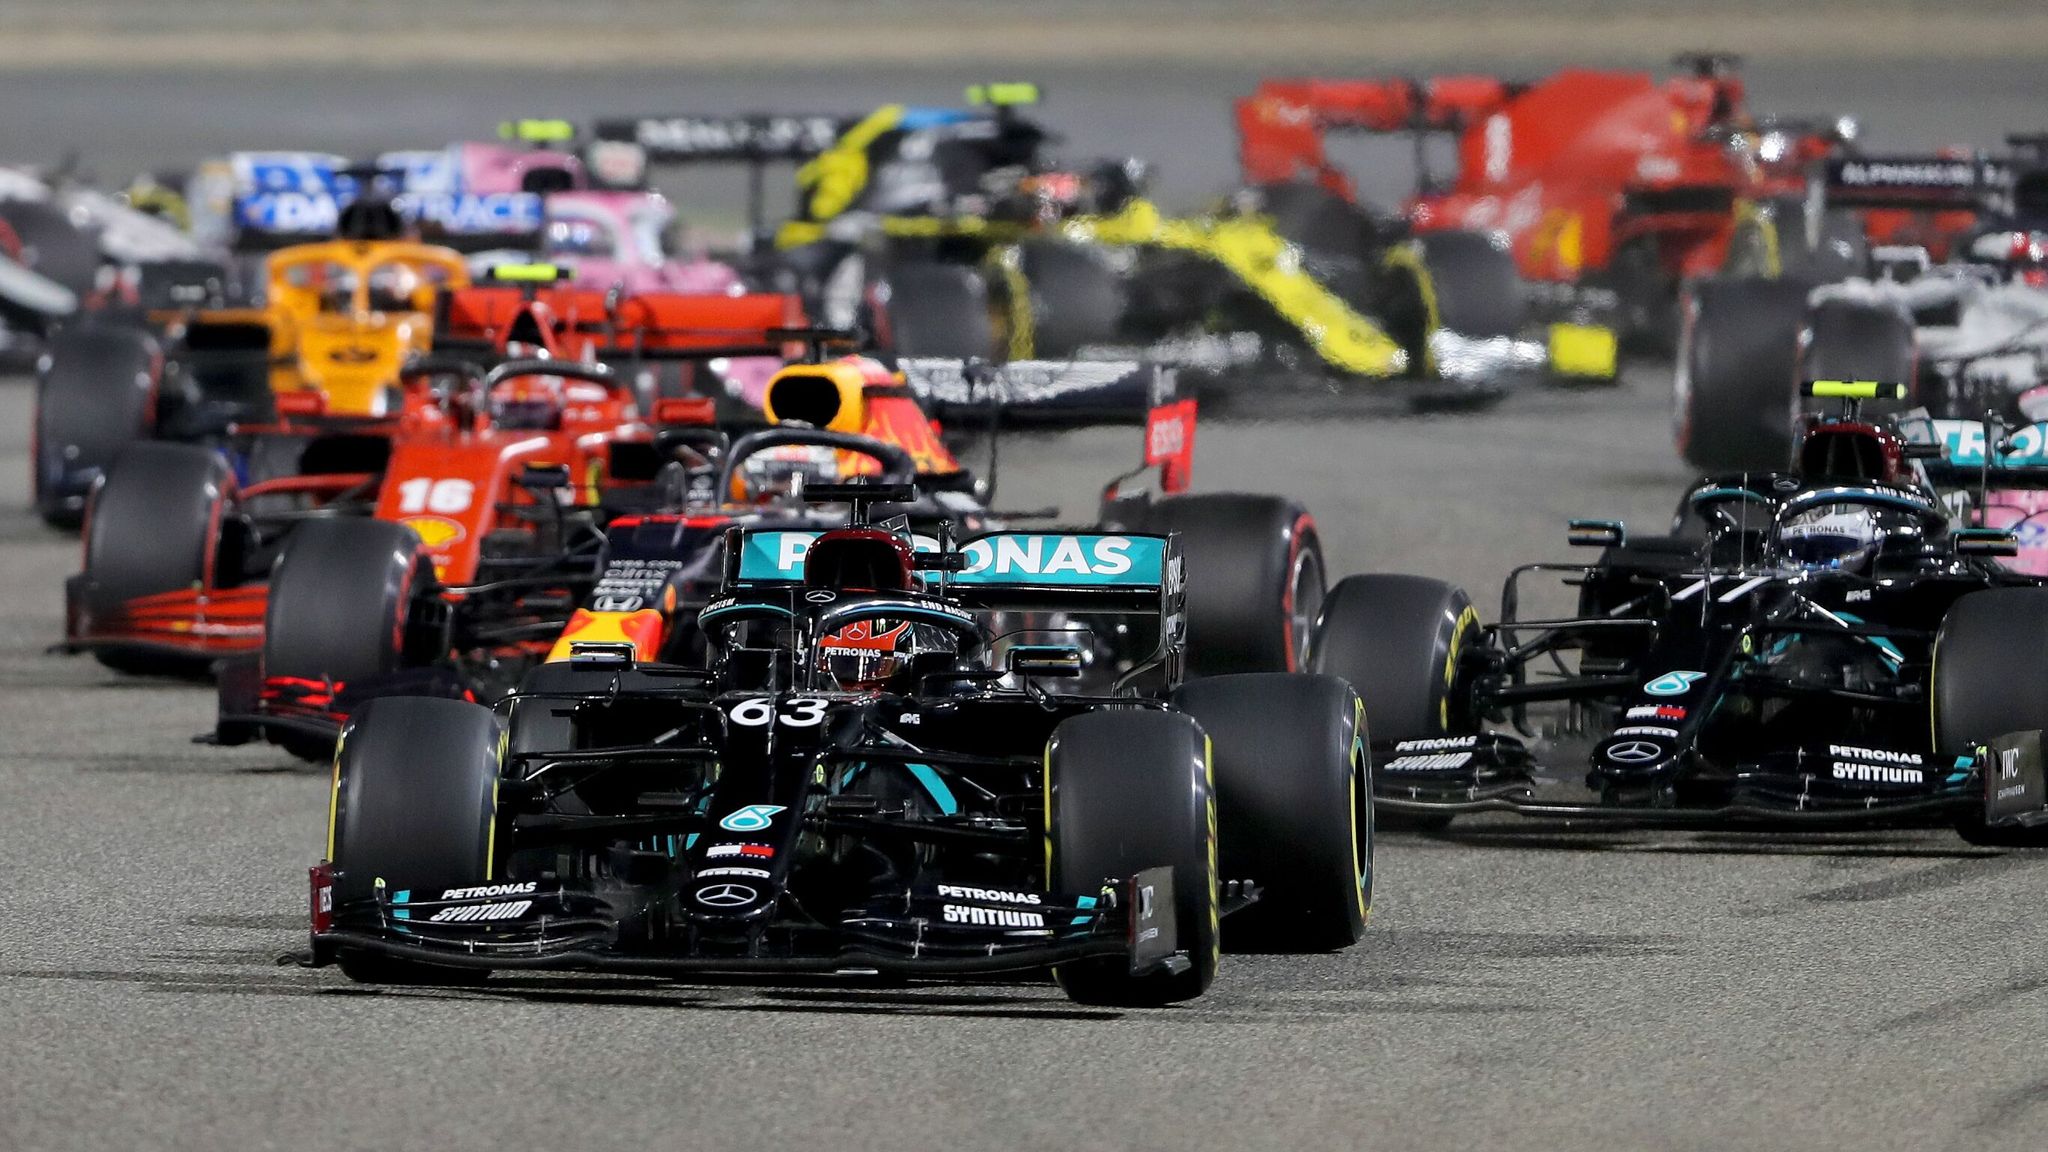 F1 calendar of record 23 races for 2021 season gains FIA approval F1 News